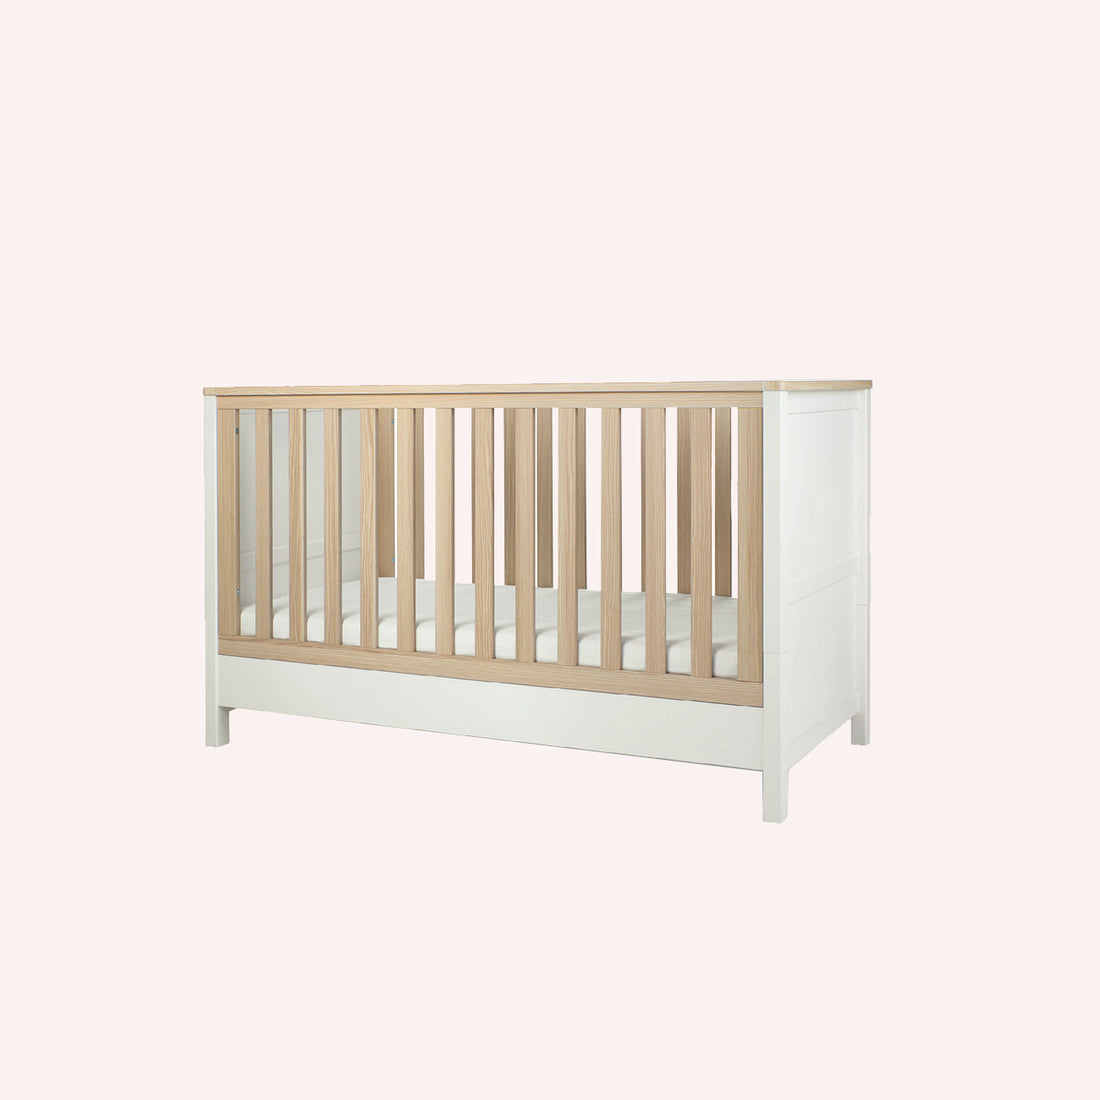 Harwell Cot Bed - White/Natural